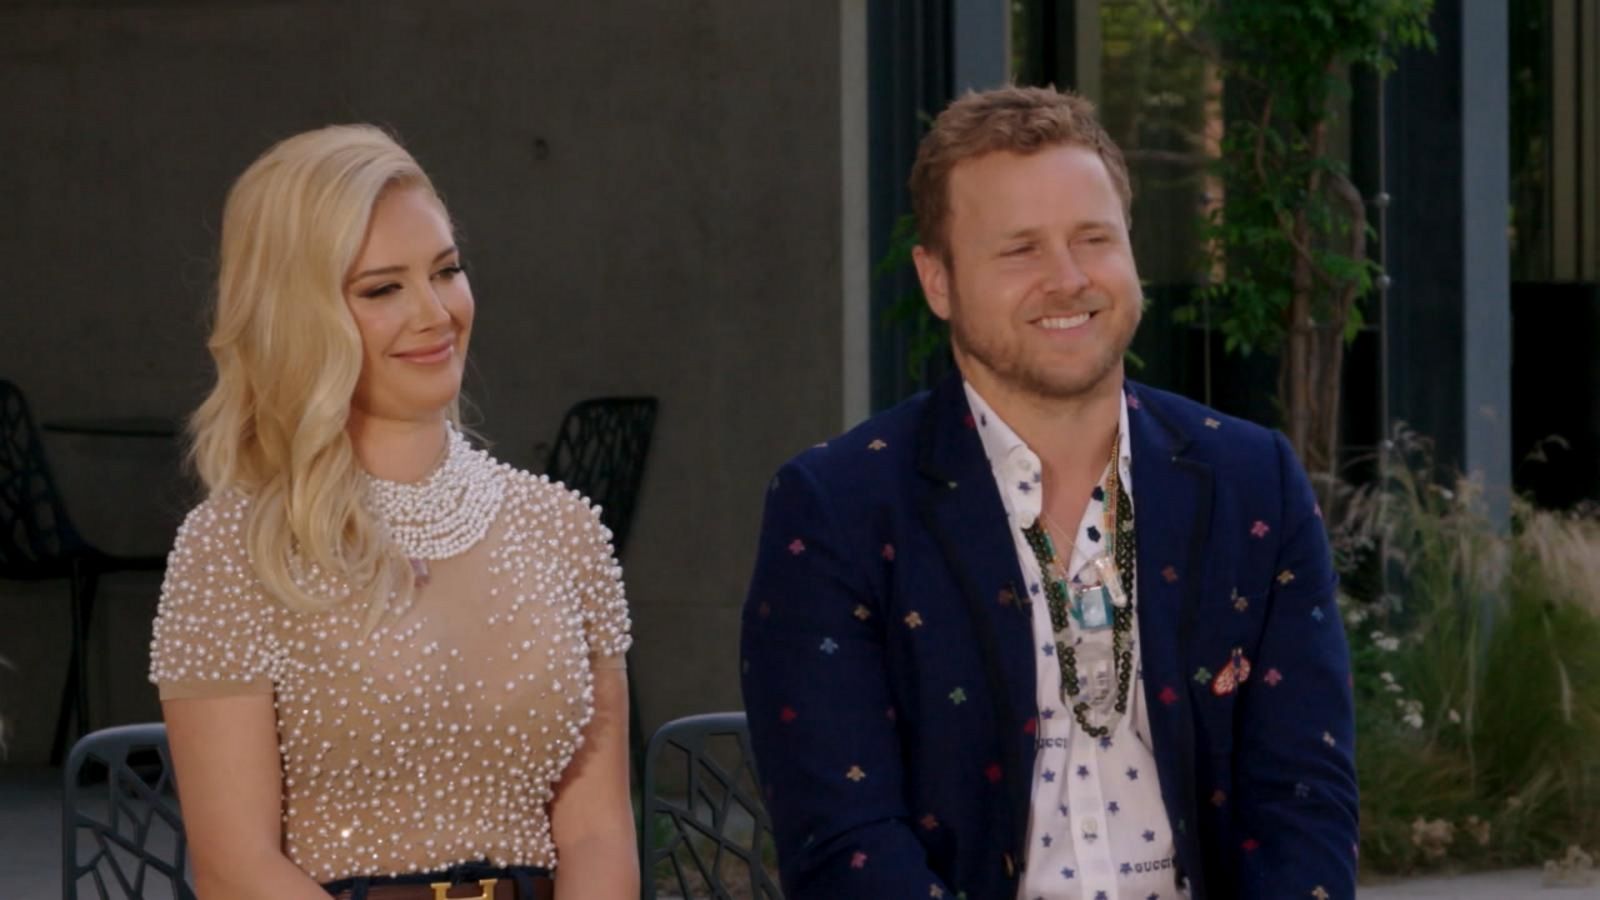 Cast of 'The Hills: New Beginnings' talks about the drama-filled show ahead  of season 2 premiere - Good Morning America